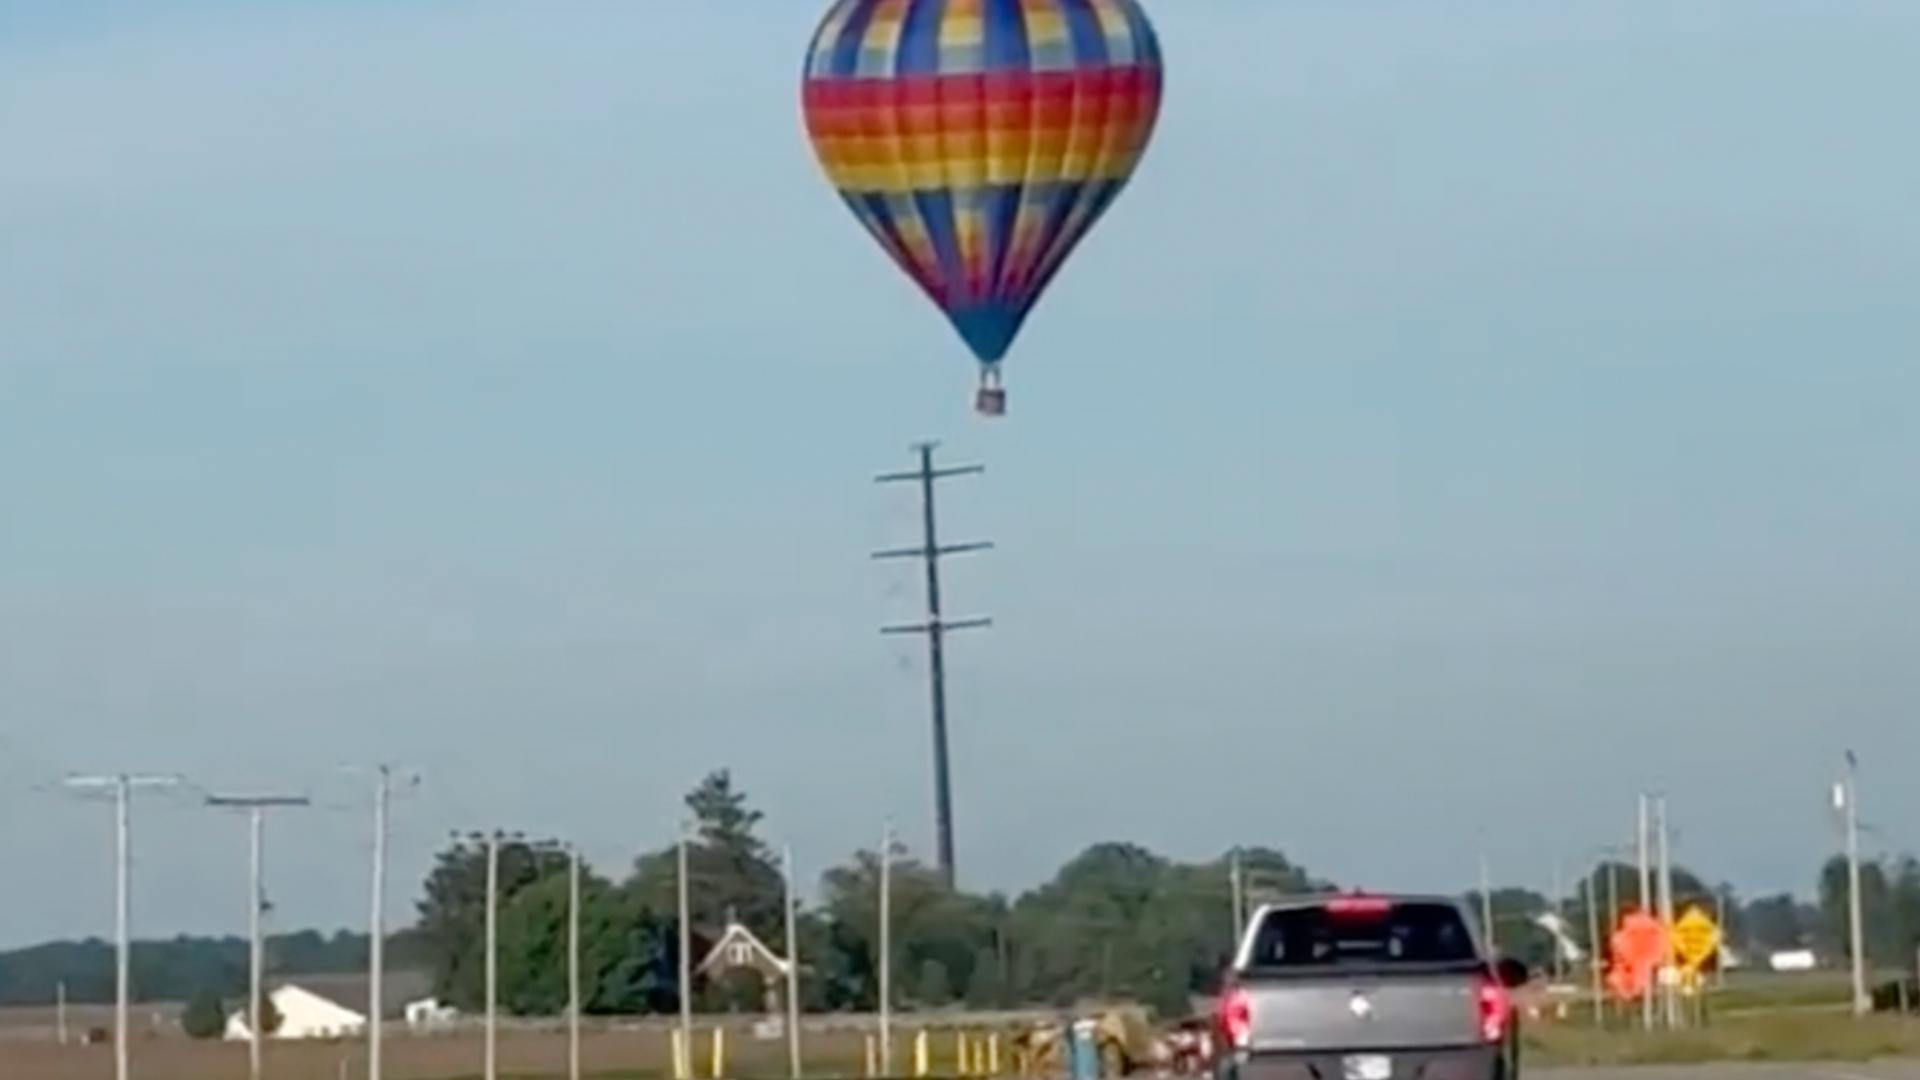 Federal investigators are probing a hot air balloon crash in northwestern Indiana that injured three people who were in the balloon’s basket, which had caught fire.